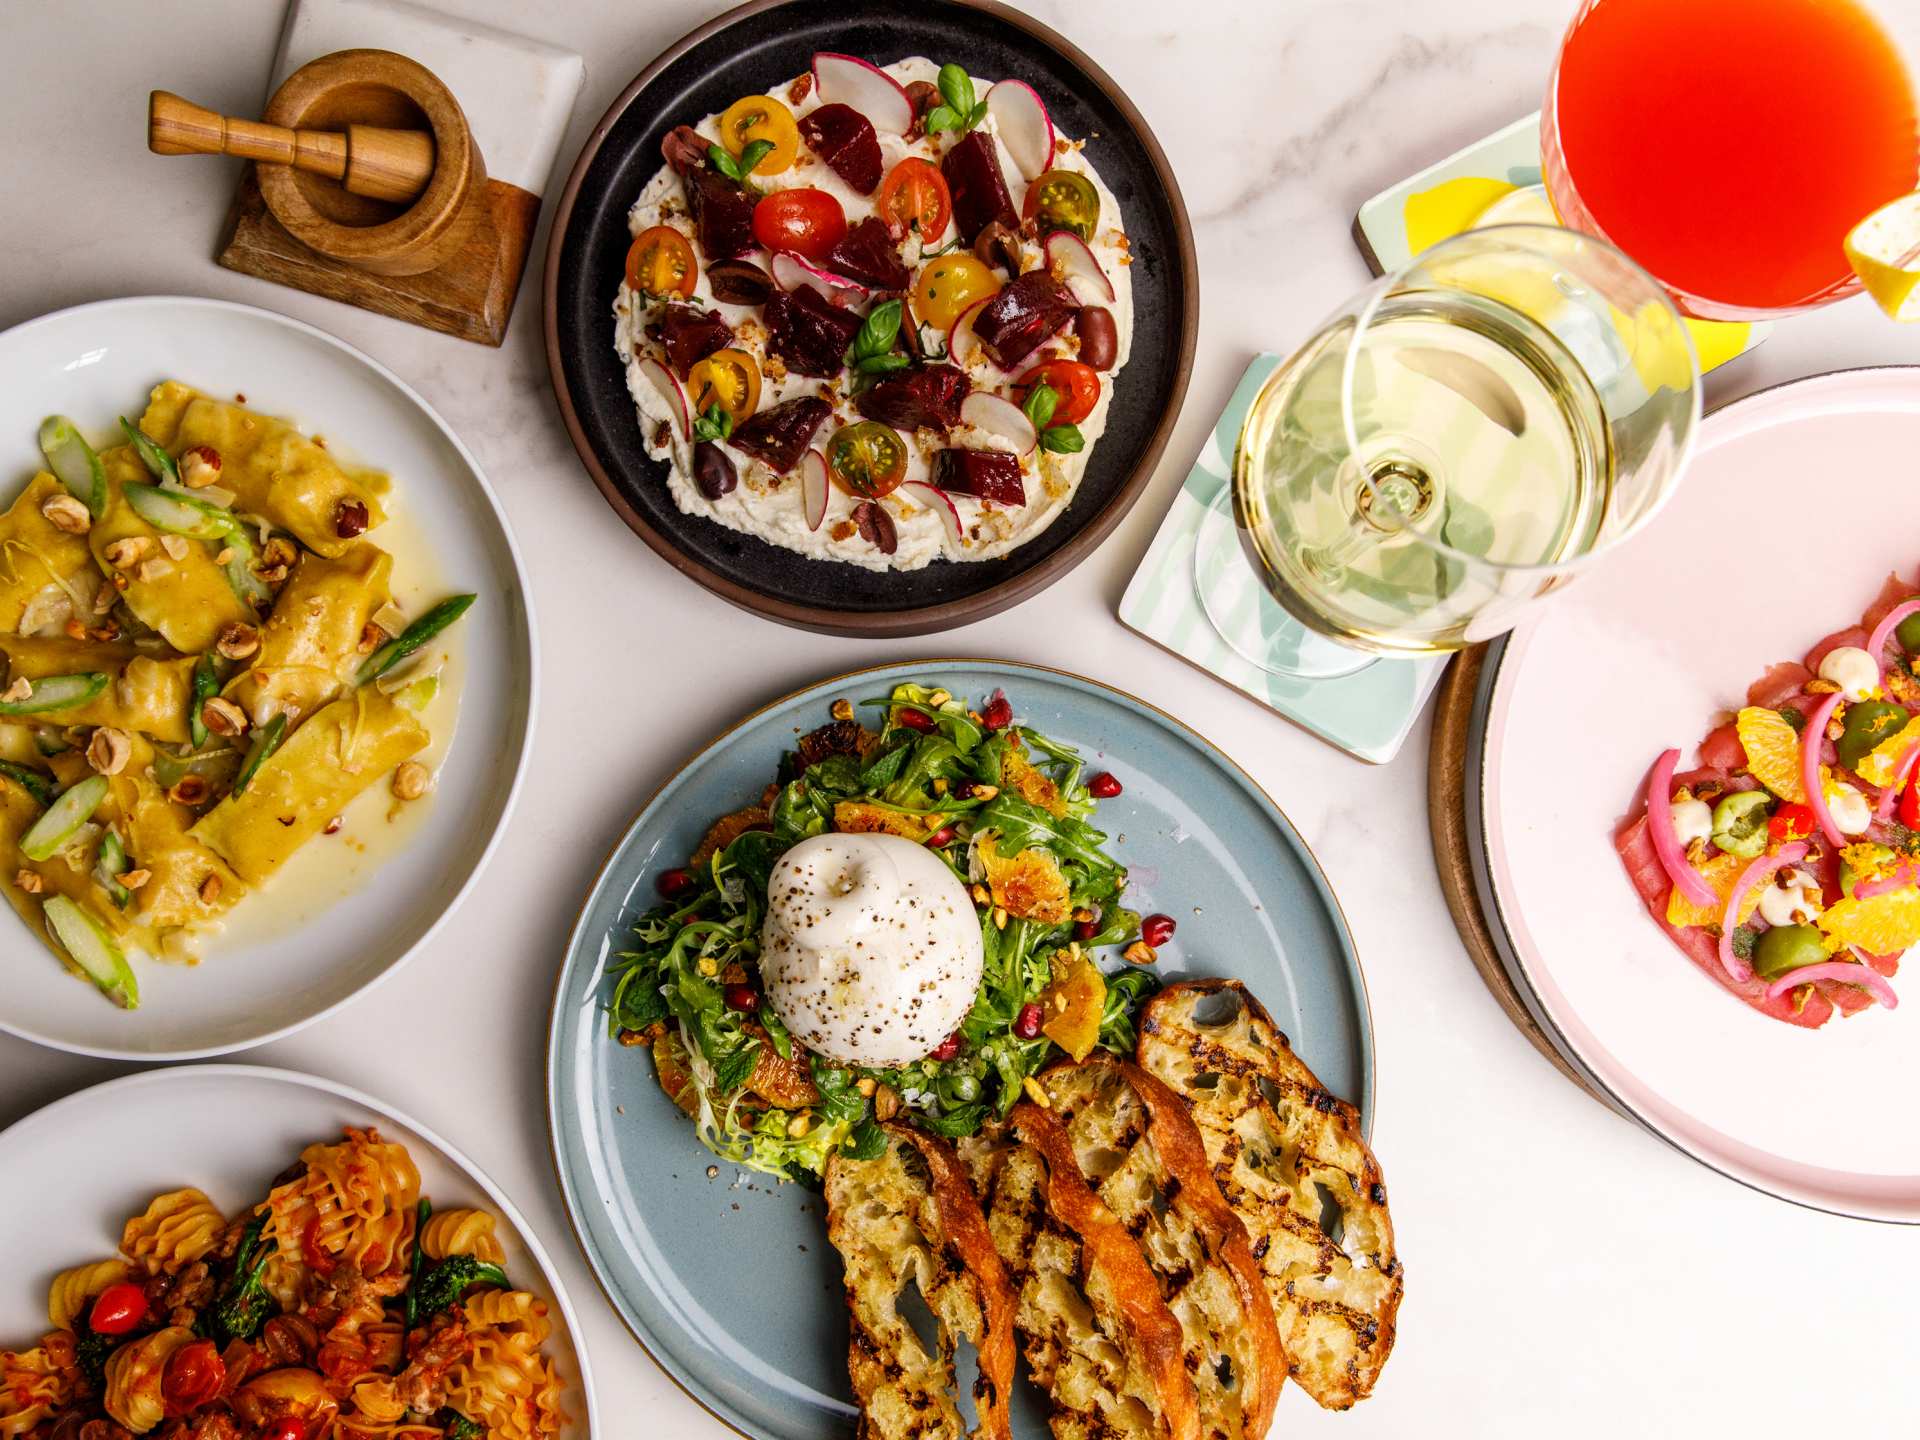 Best new restaurants Toronto | A spread of dishes and drinks at Edna + Vita